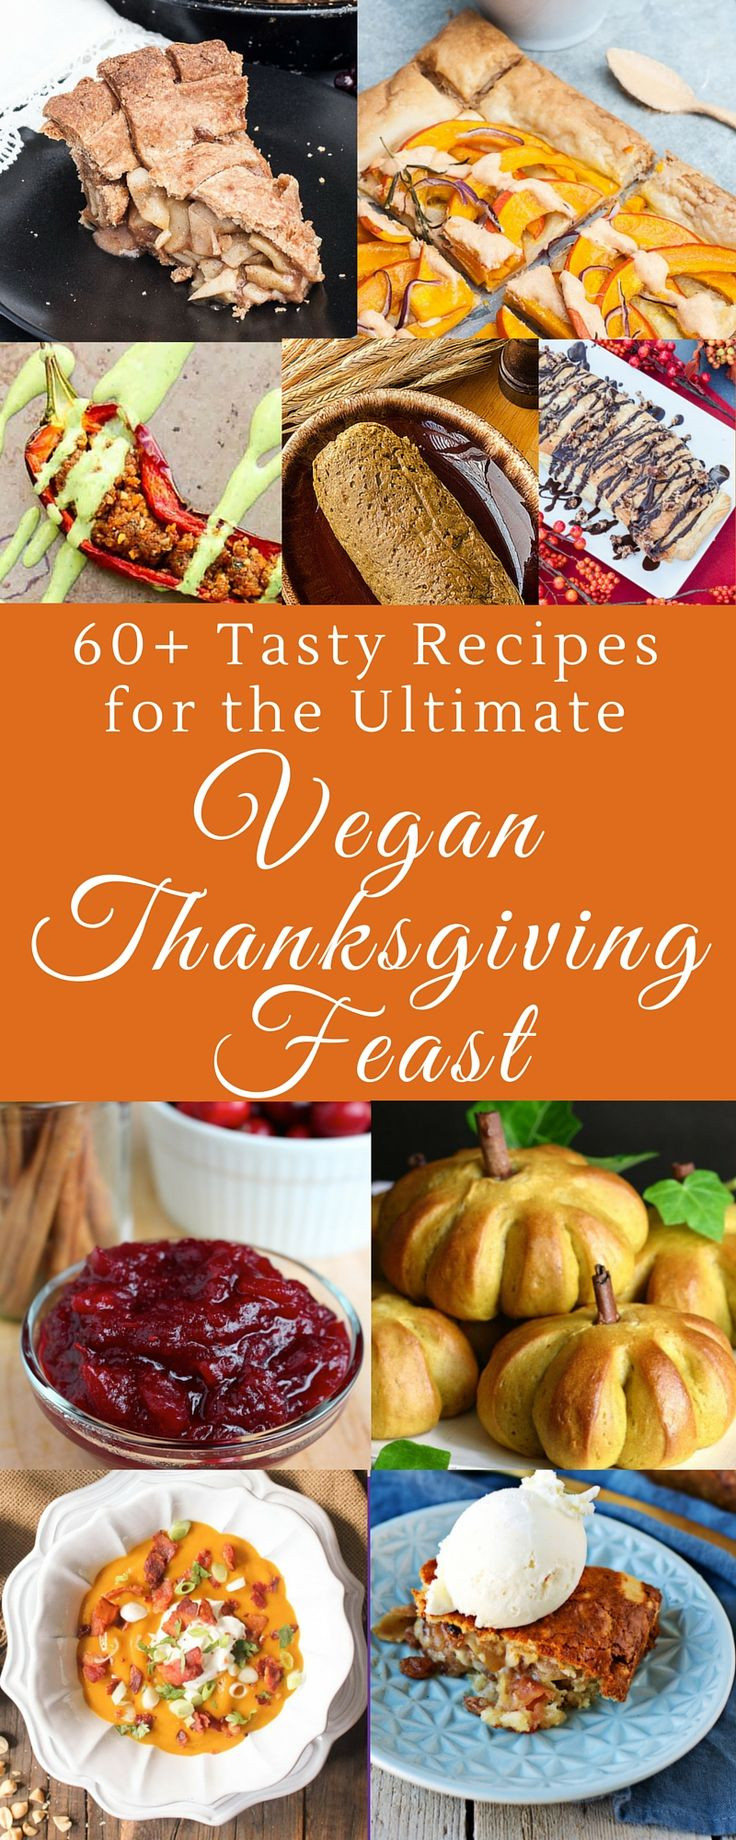 Vegetarian Thanksgiving Dinner Recipes
 17 Best images about Ve arian Holidays on Pinterest